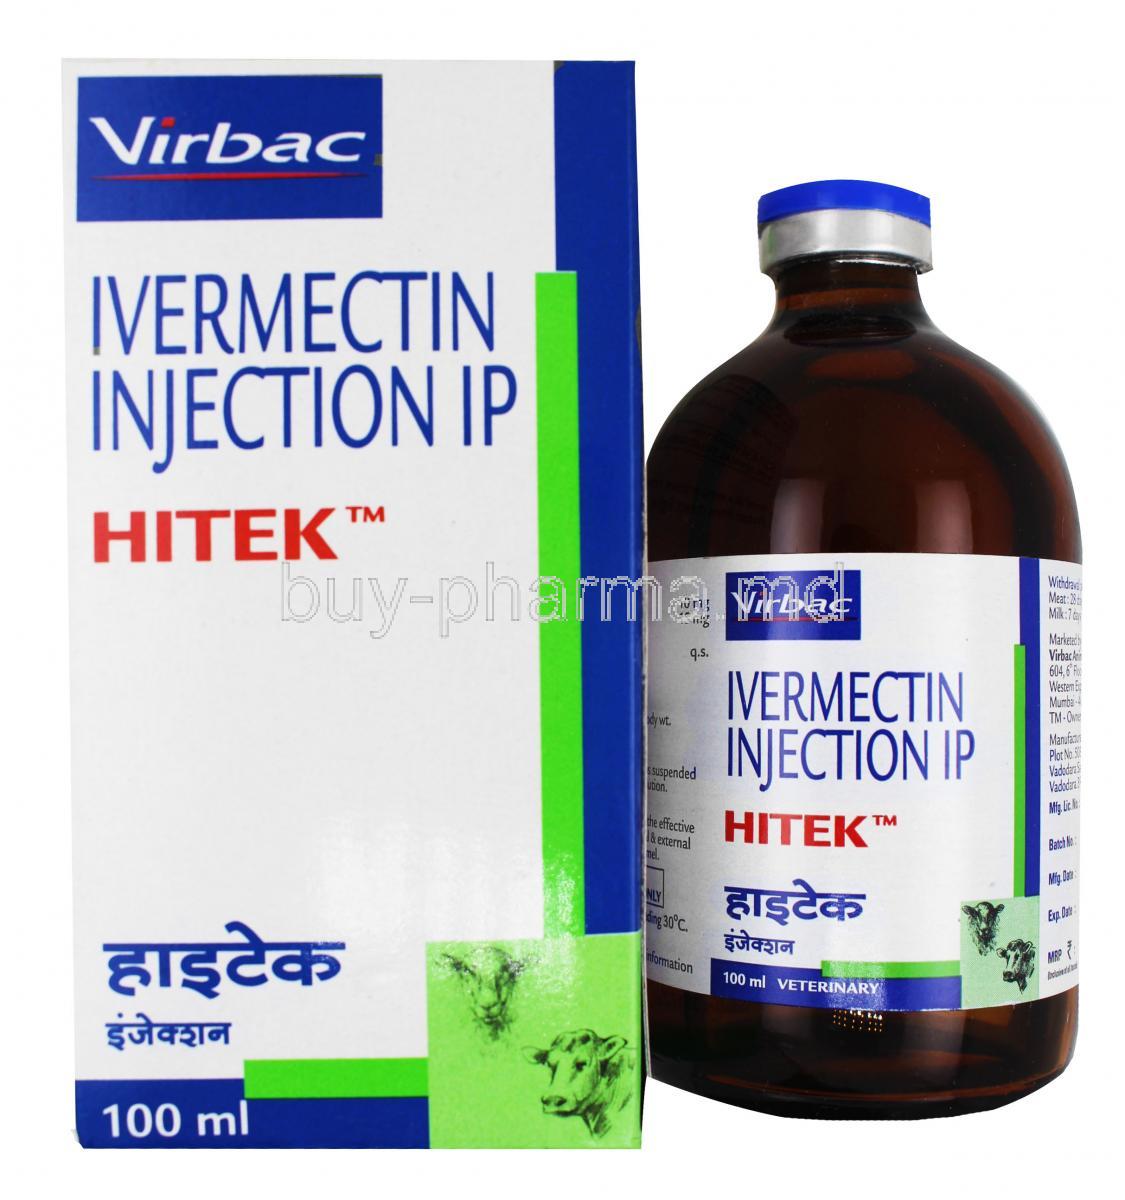 Hitek Injection for Cattle, Sheep and Camel box and vial